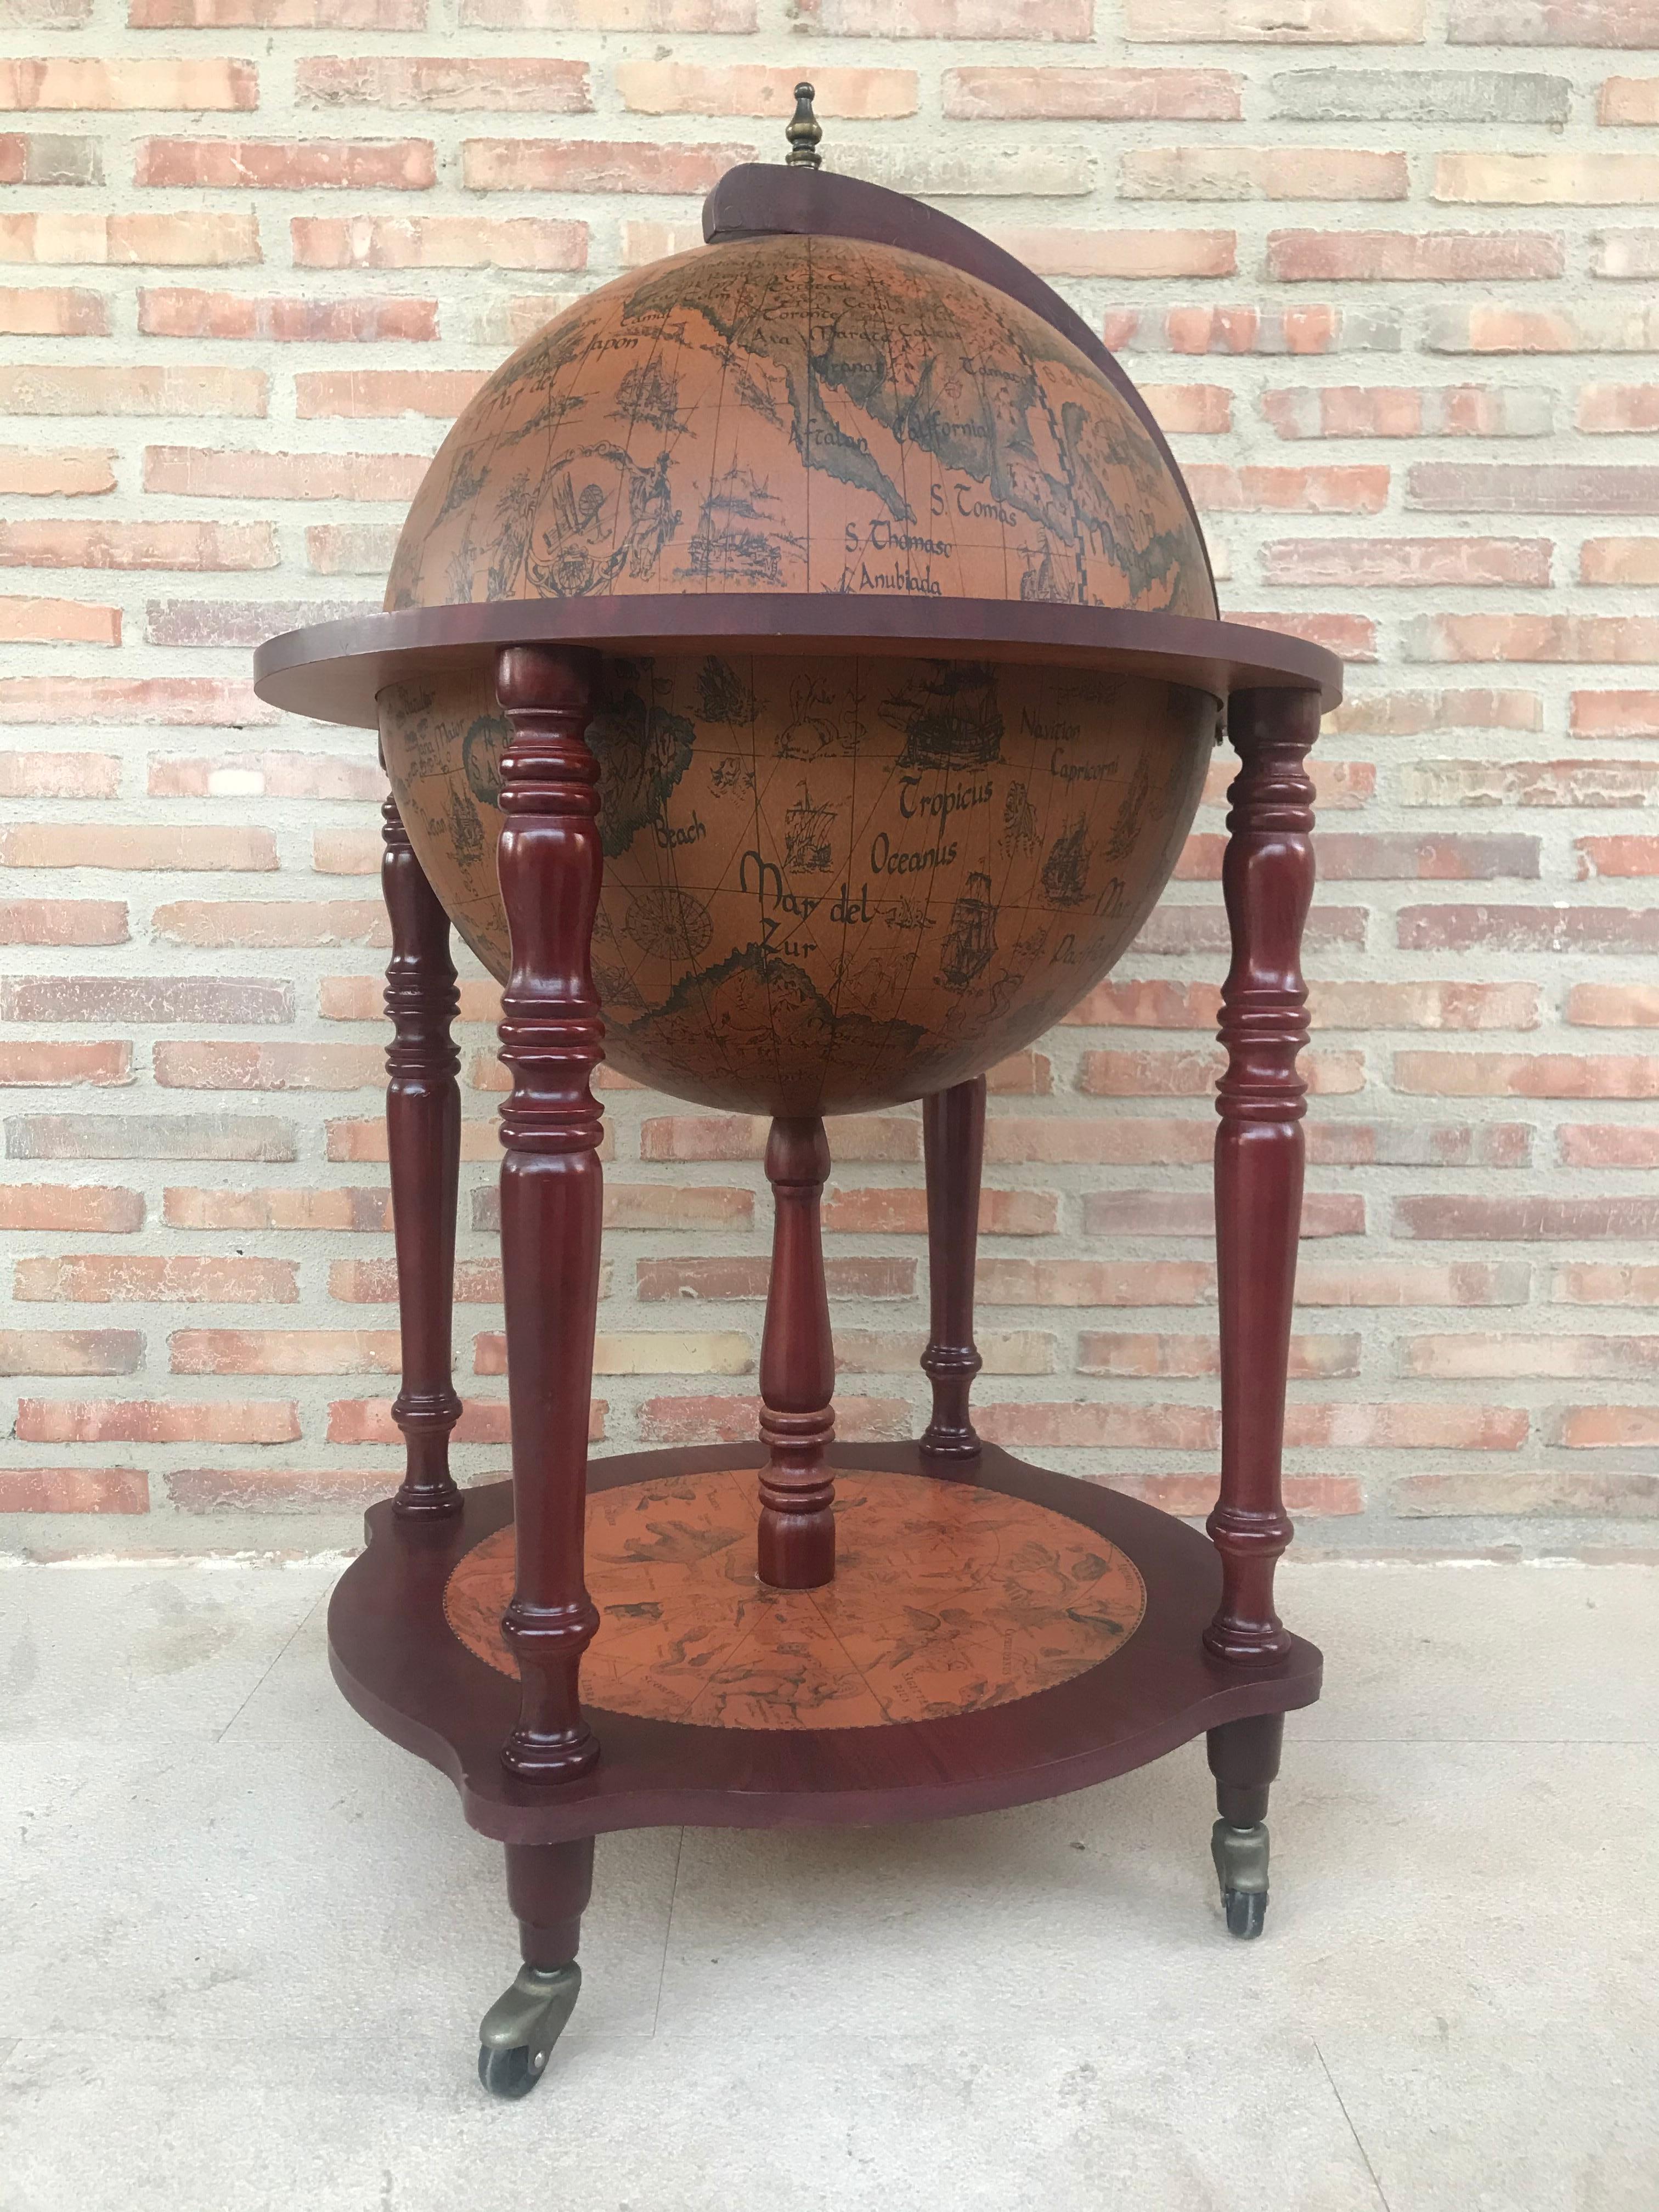 This is a modernist midcentury cocktail drinks cabinet in the form of a globe, circa 1960 in date.

The hinged top section opens to reveal a fitted interior with spaces for glasses and a ice bucket. 

The exterior of the globe has the map of the